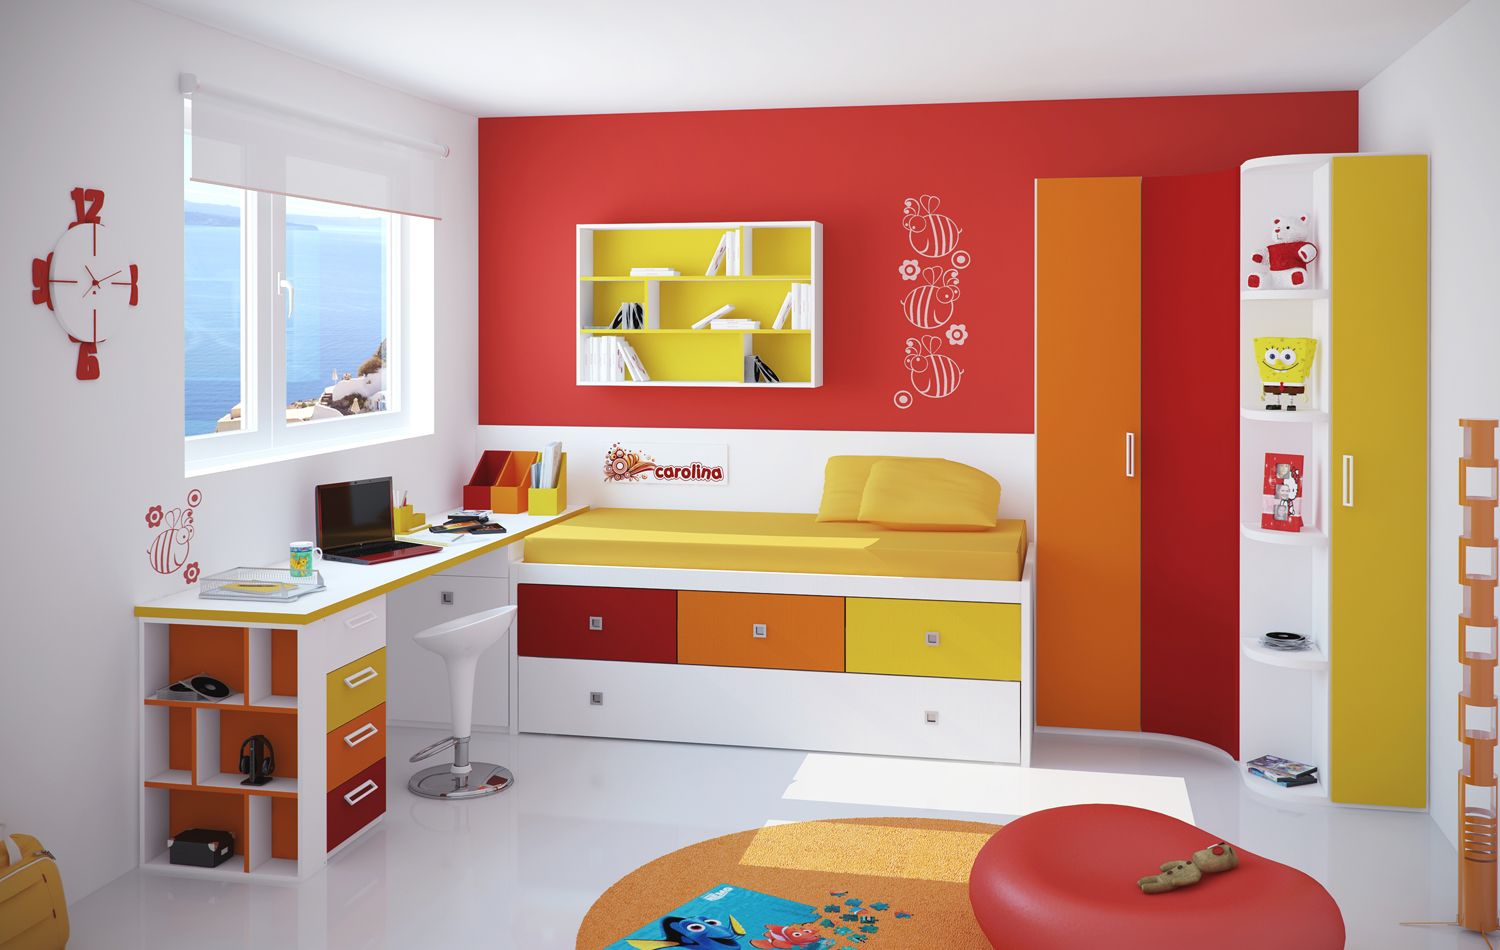 Kids Bedroom And Mesmerizing Kids Bedroom Applying Red And White Also Yellow Interior Color Of Kid Room Ideas With Single Bed On Platform Drawers Combined With Desk And Completed With Cupboards Kids Room 15 Trendy Kids Room Ideas For The Bold Modern Home